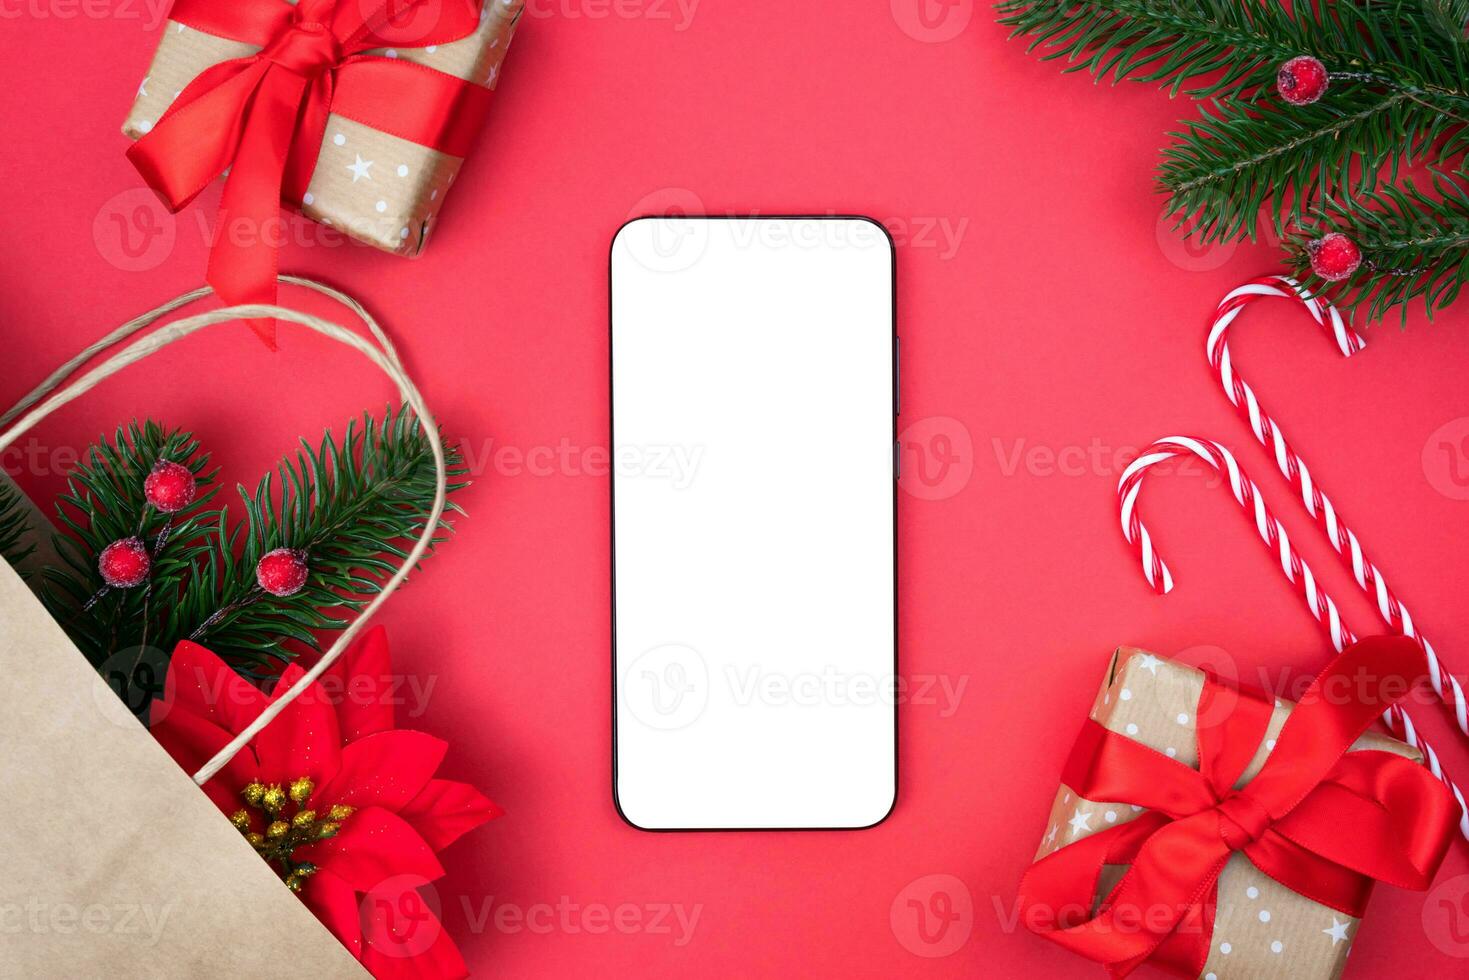 Mobile phone, Christmas gifts and decorations on a red background. Christmas online shopping concept. Copy space. Top view. photo